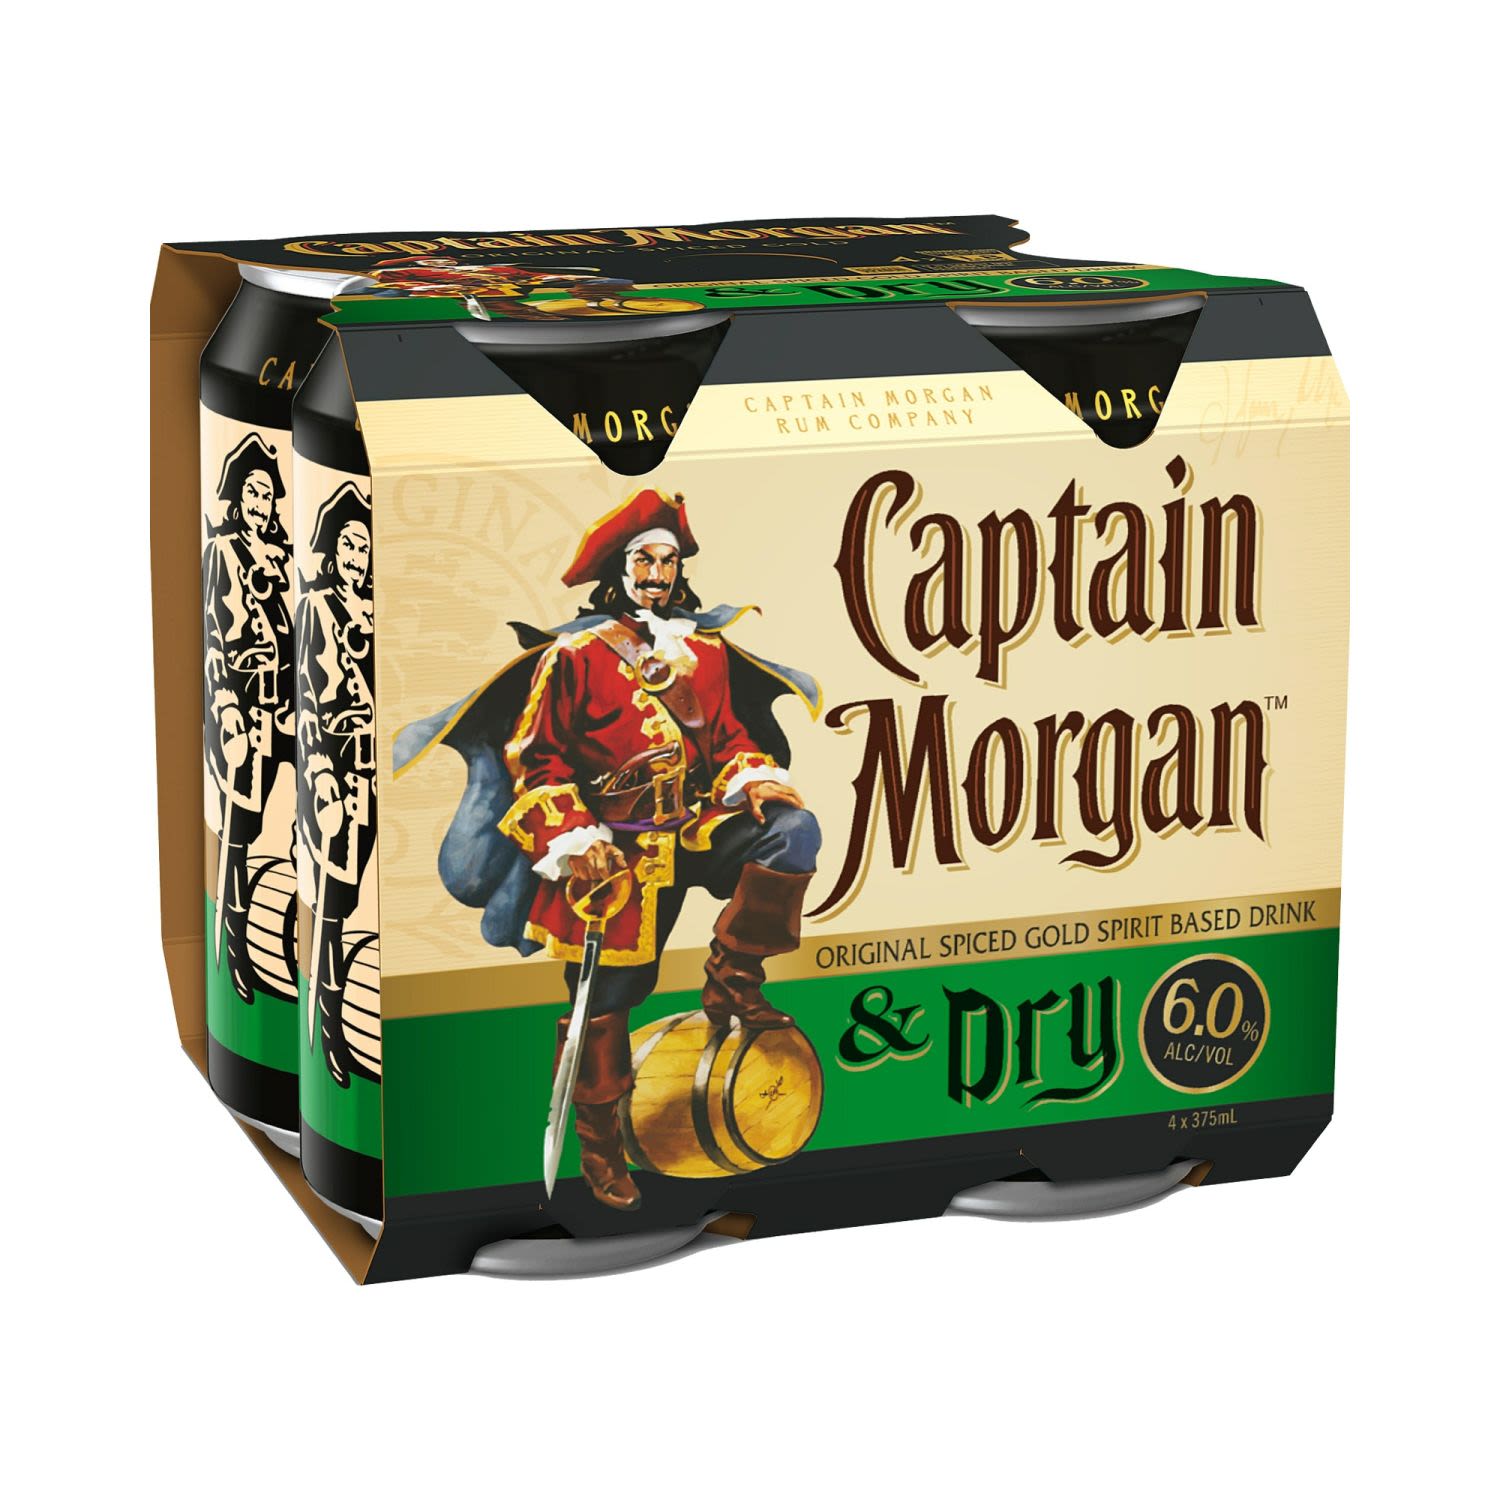 Captain Morgan Original Spiced Gold and Dry Can 375mL 4 Pack